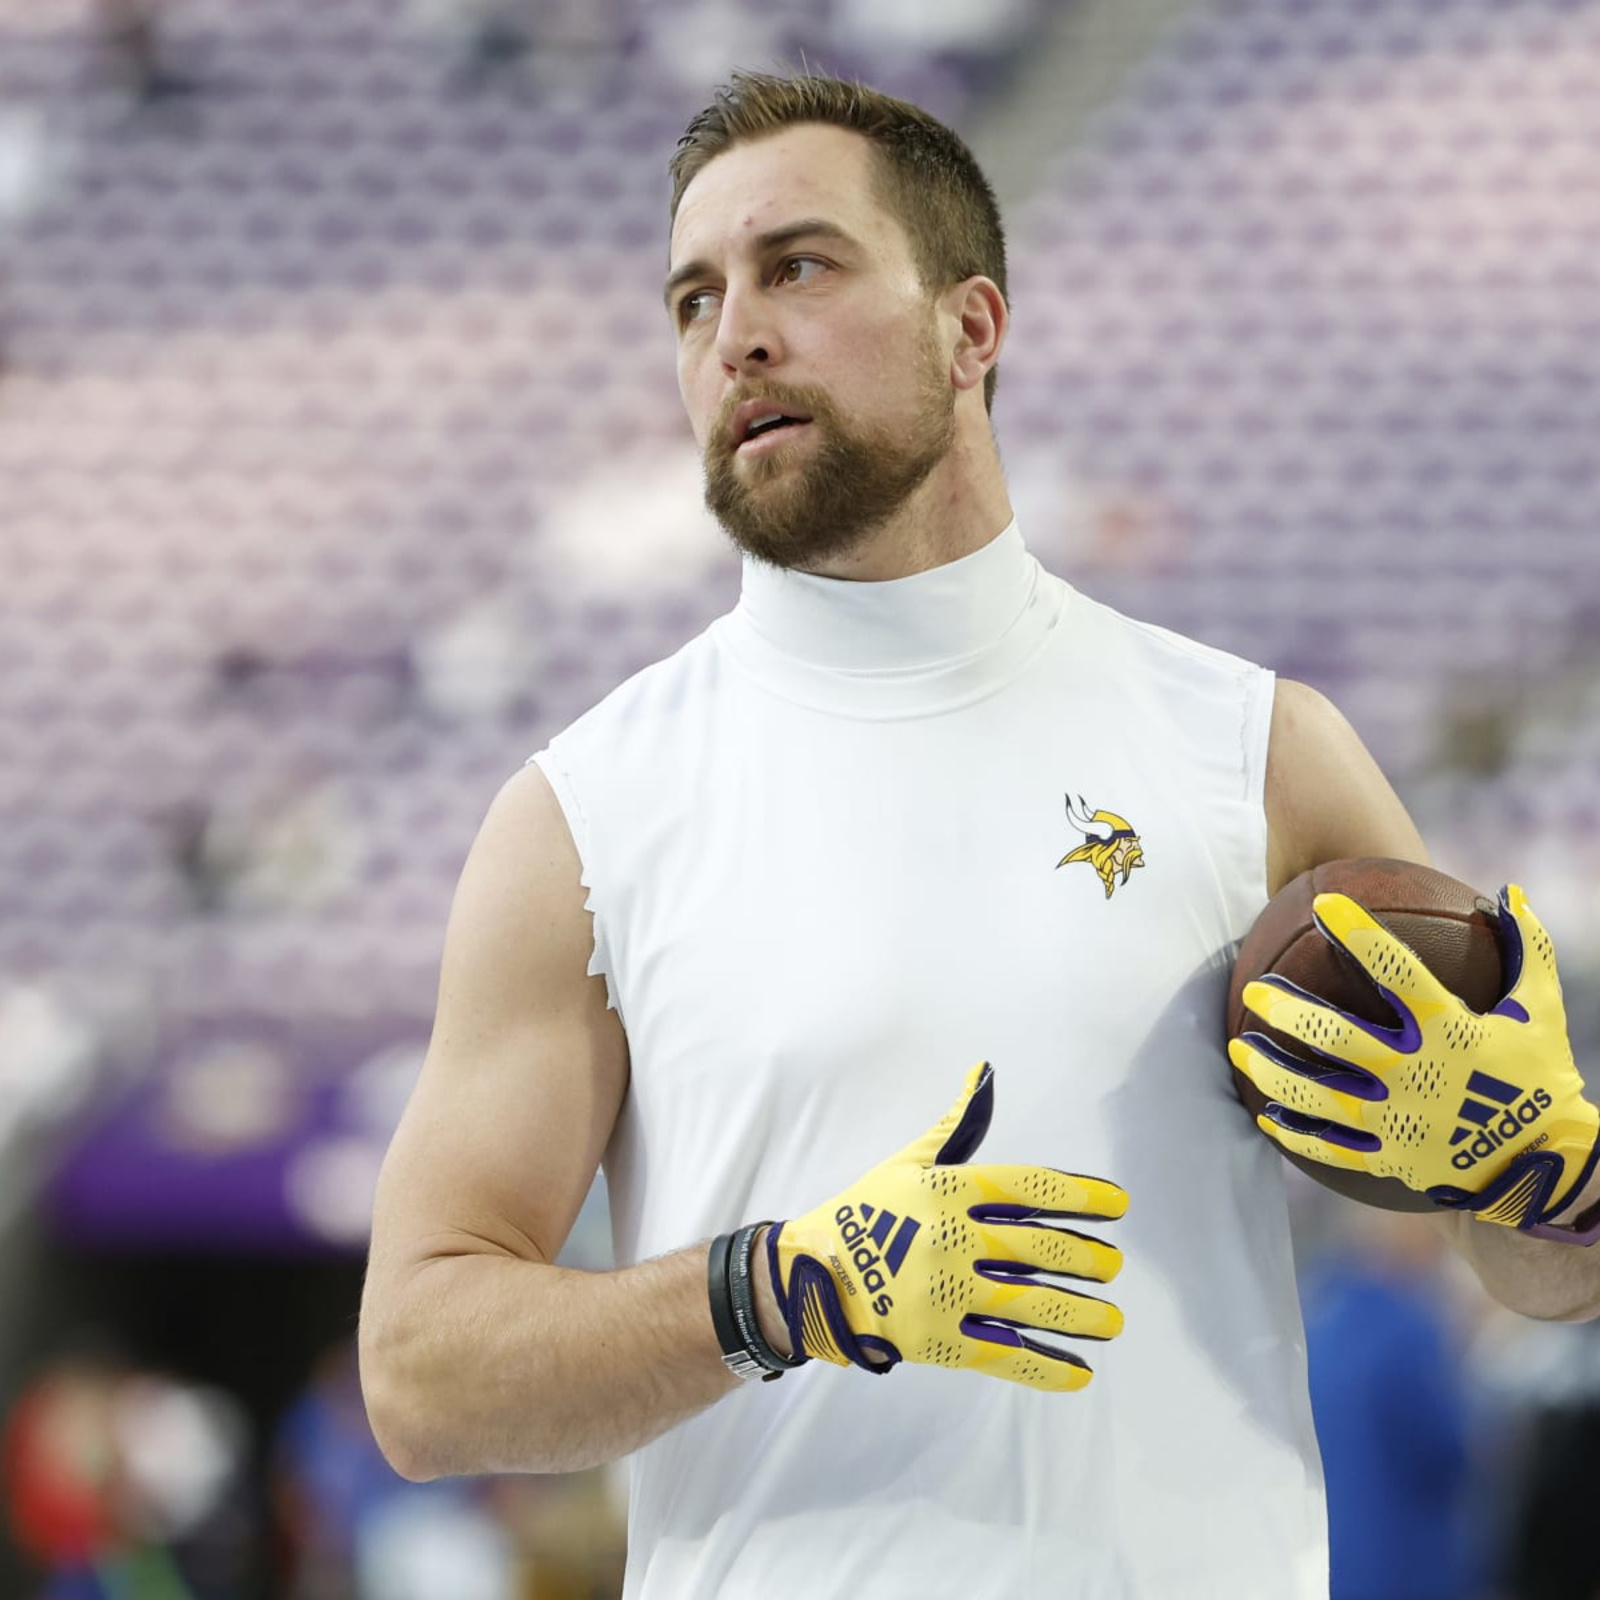 Reports: Adam Thielen restructures contract to create cap space